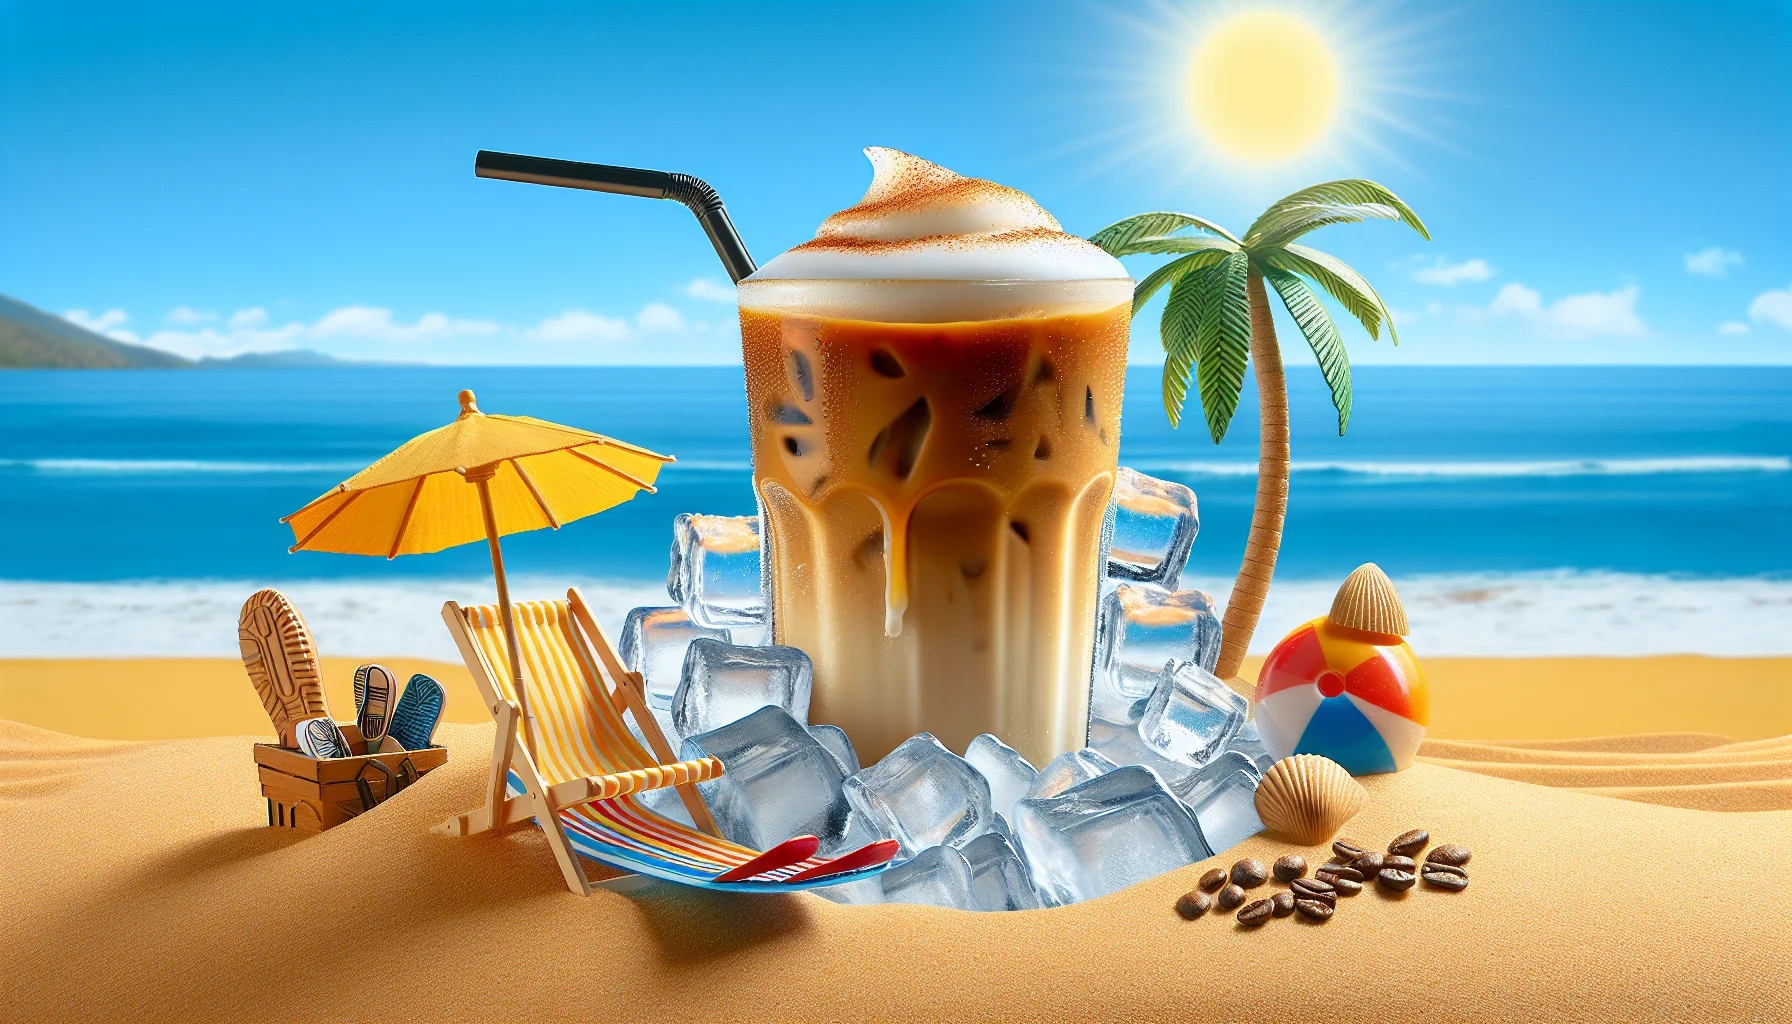 Produce a humorous scene in which an iced cappuccino takes center stage. Perhaps the cappuccino could be skiing down an avalanche of ice, or maybe it’s sitting in a tiny beach chair with a mini umbrella, sunbathing under the scorching sun. Let's see an appealing summer background, think blue ocean, yellow sand, palm trees. The idea is to project a sense of relaxation, fun, and also a cheeky invite for people to refresh themselves with a cold beverage, especially an iced cappuccino on a hot day.